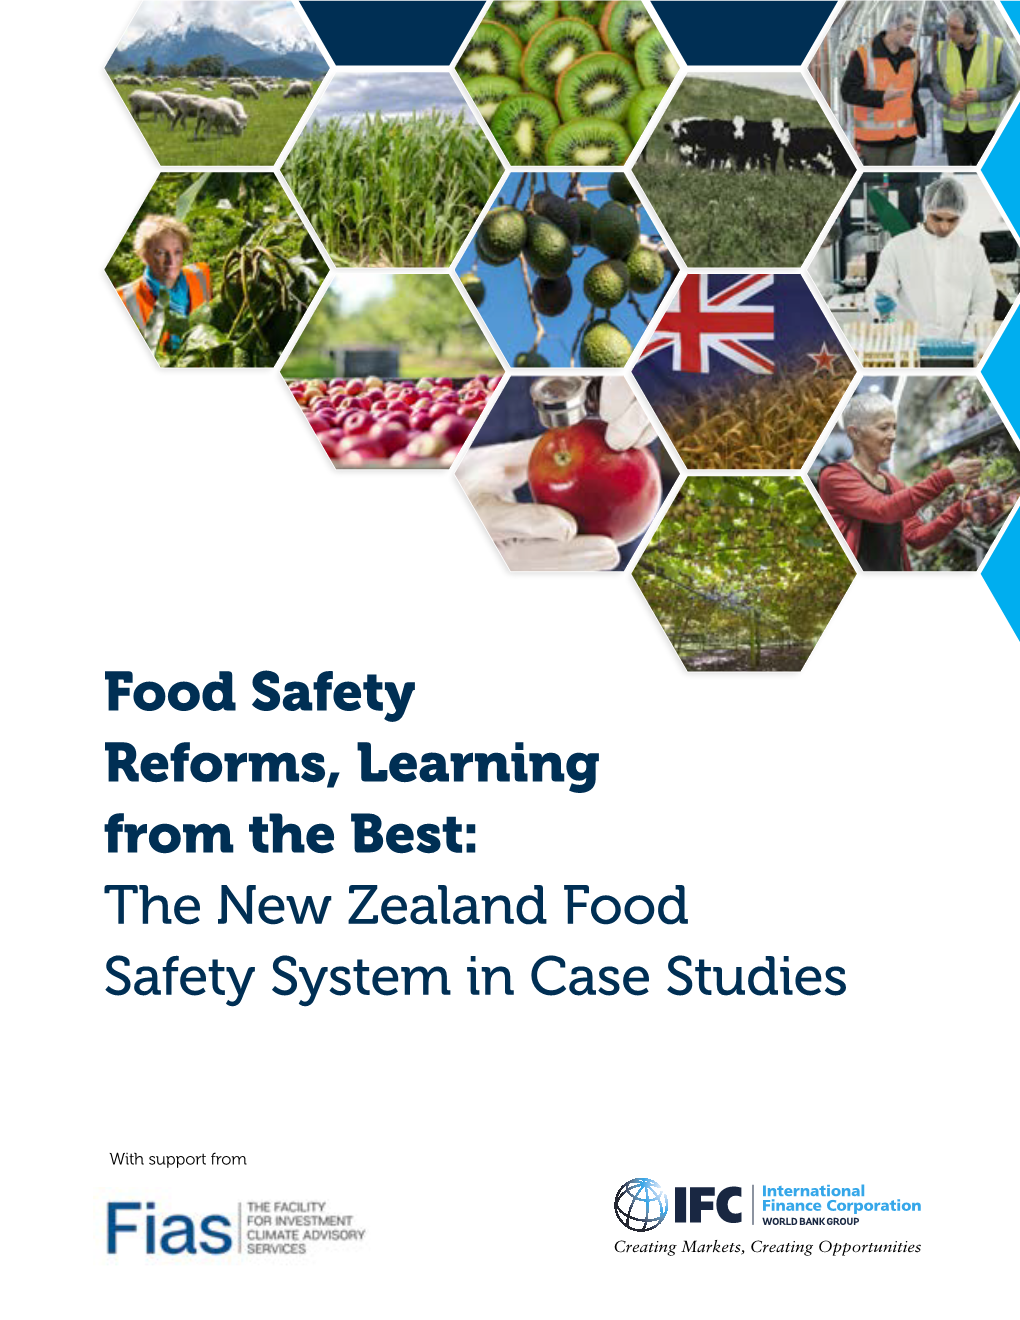 The New Zealand Food Safety System in Case Studies